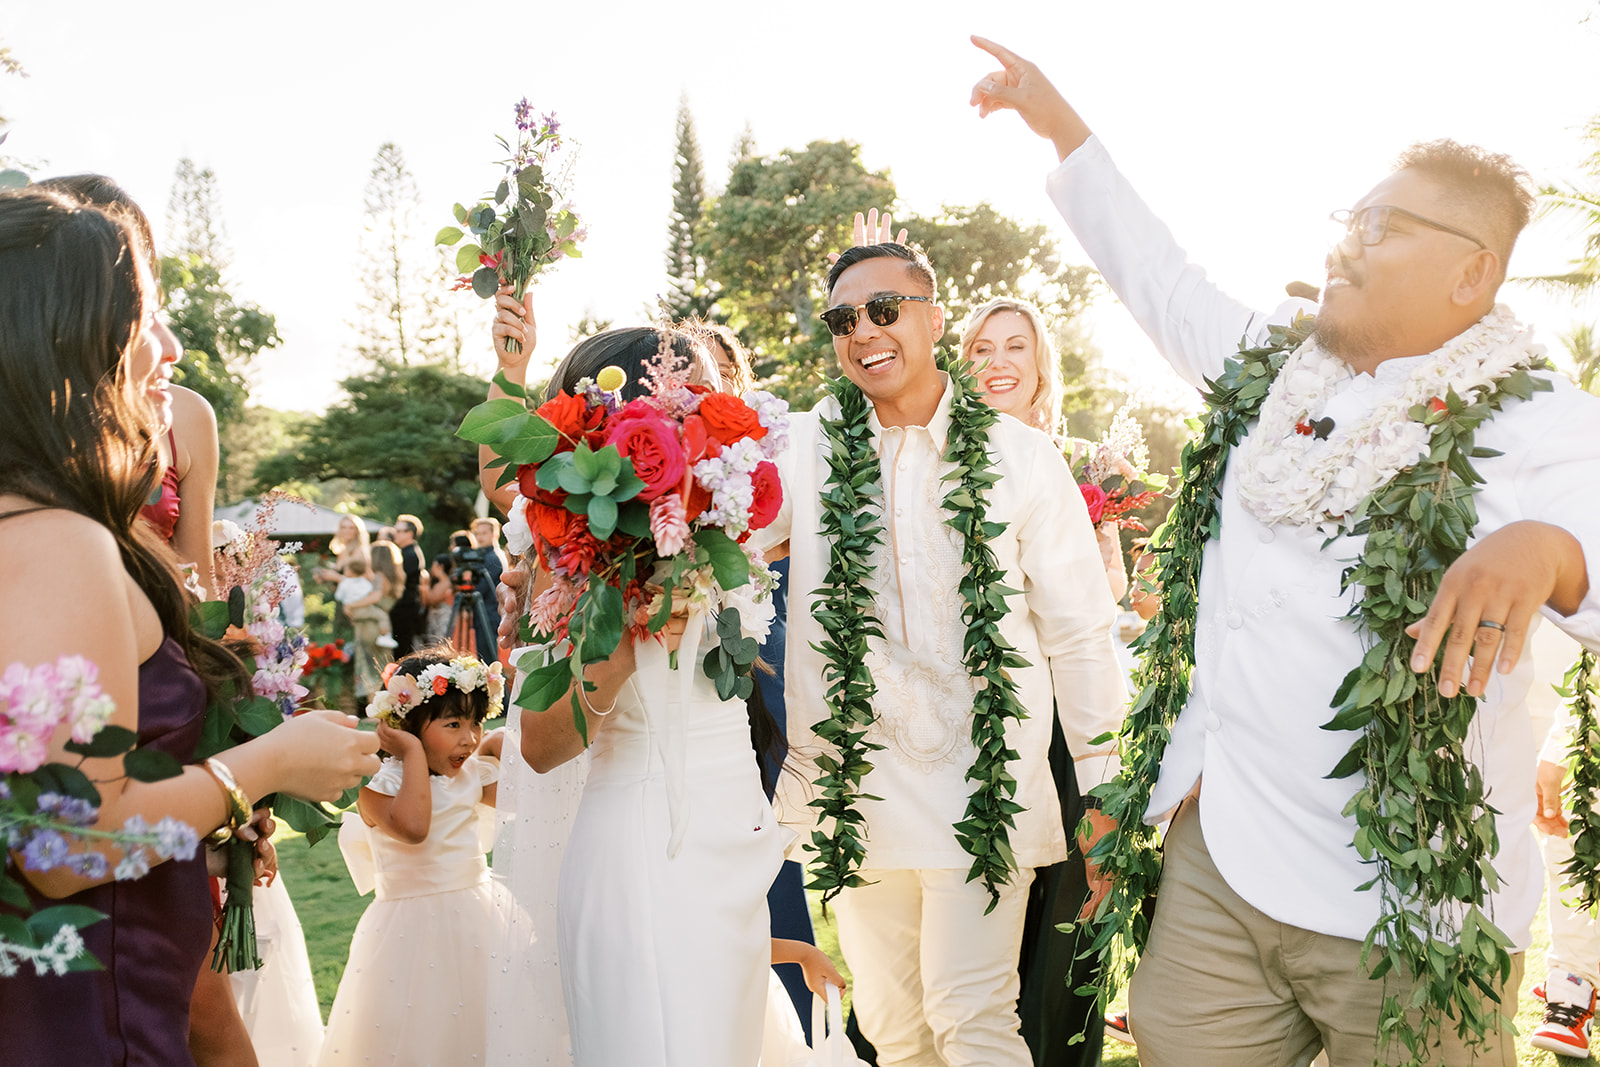 A joyous wedding procession with the newlyweds and guests celebrating at Smiths Tropical Paradise and Luau